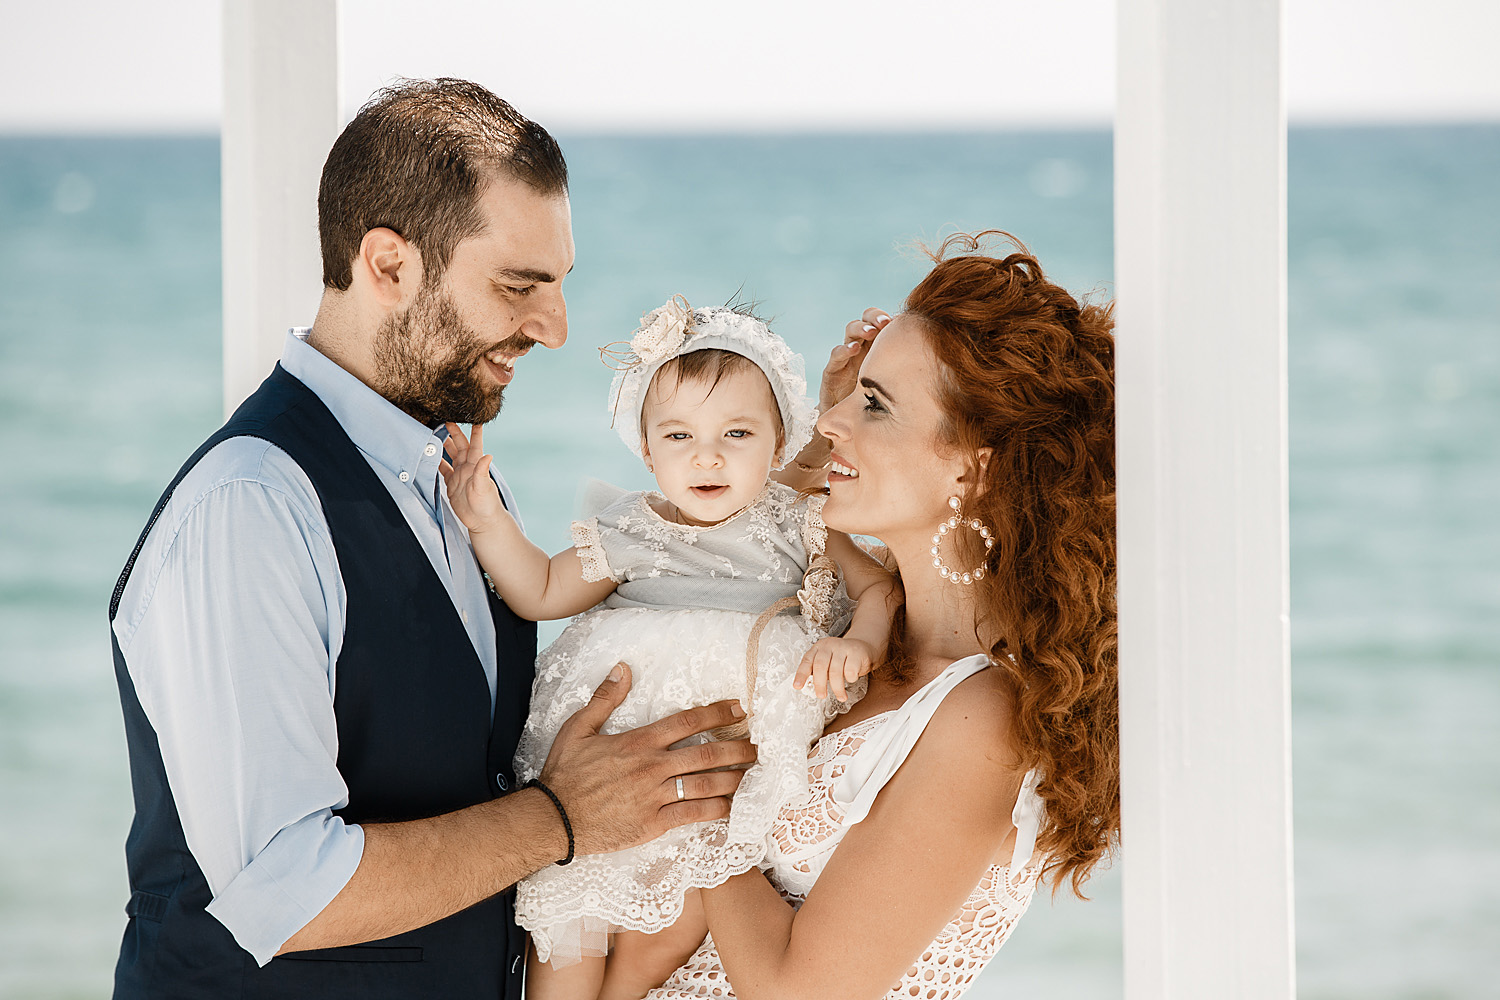 Christening in Cyprus, Christening photography in Cyprus